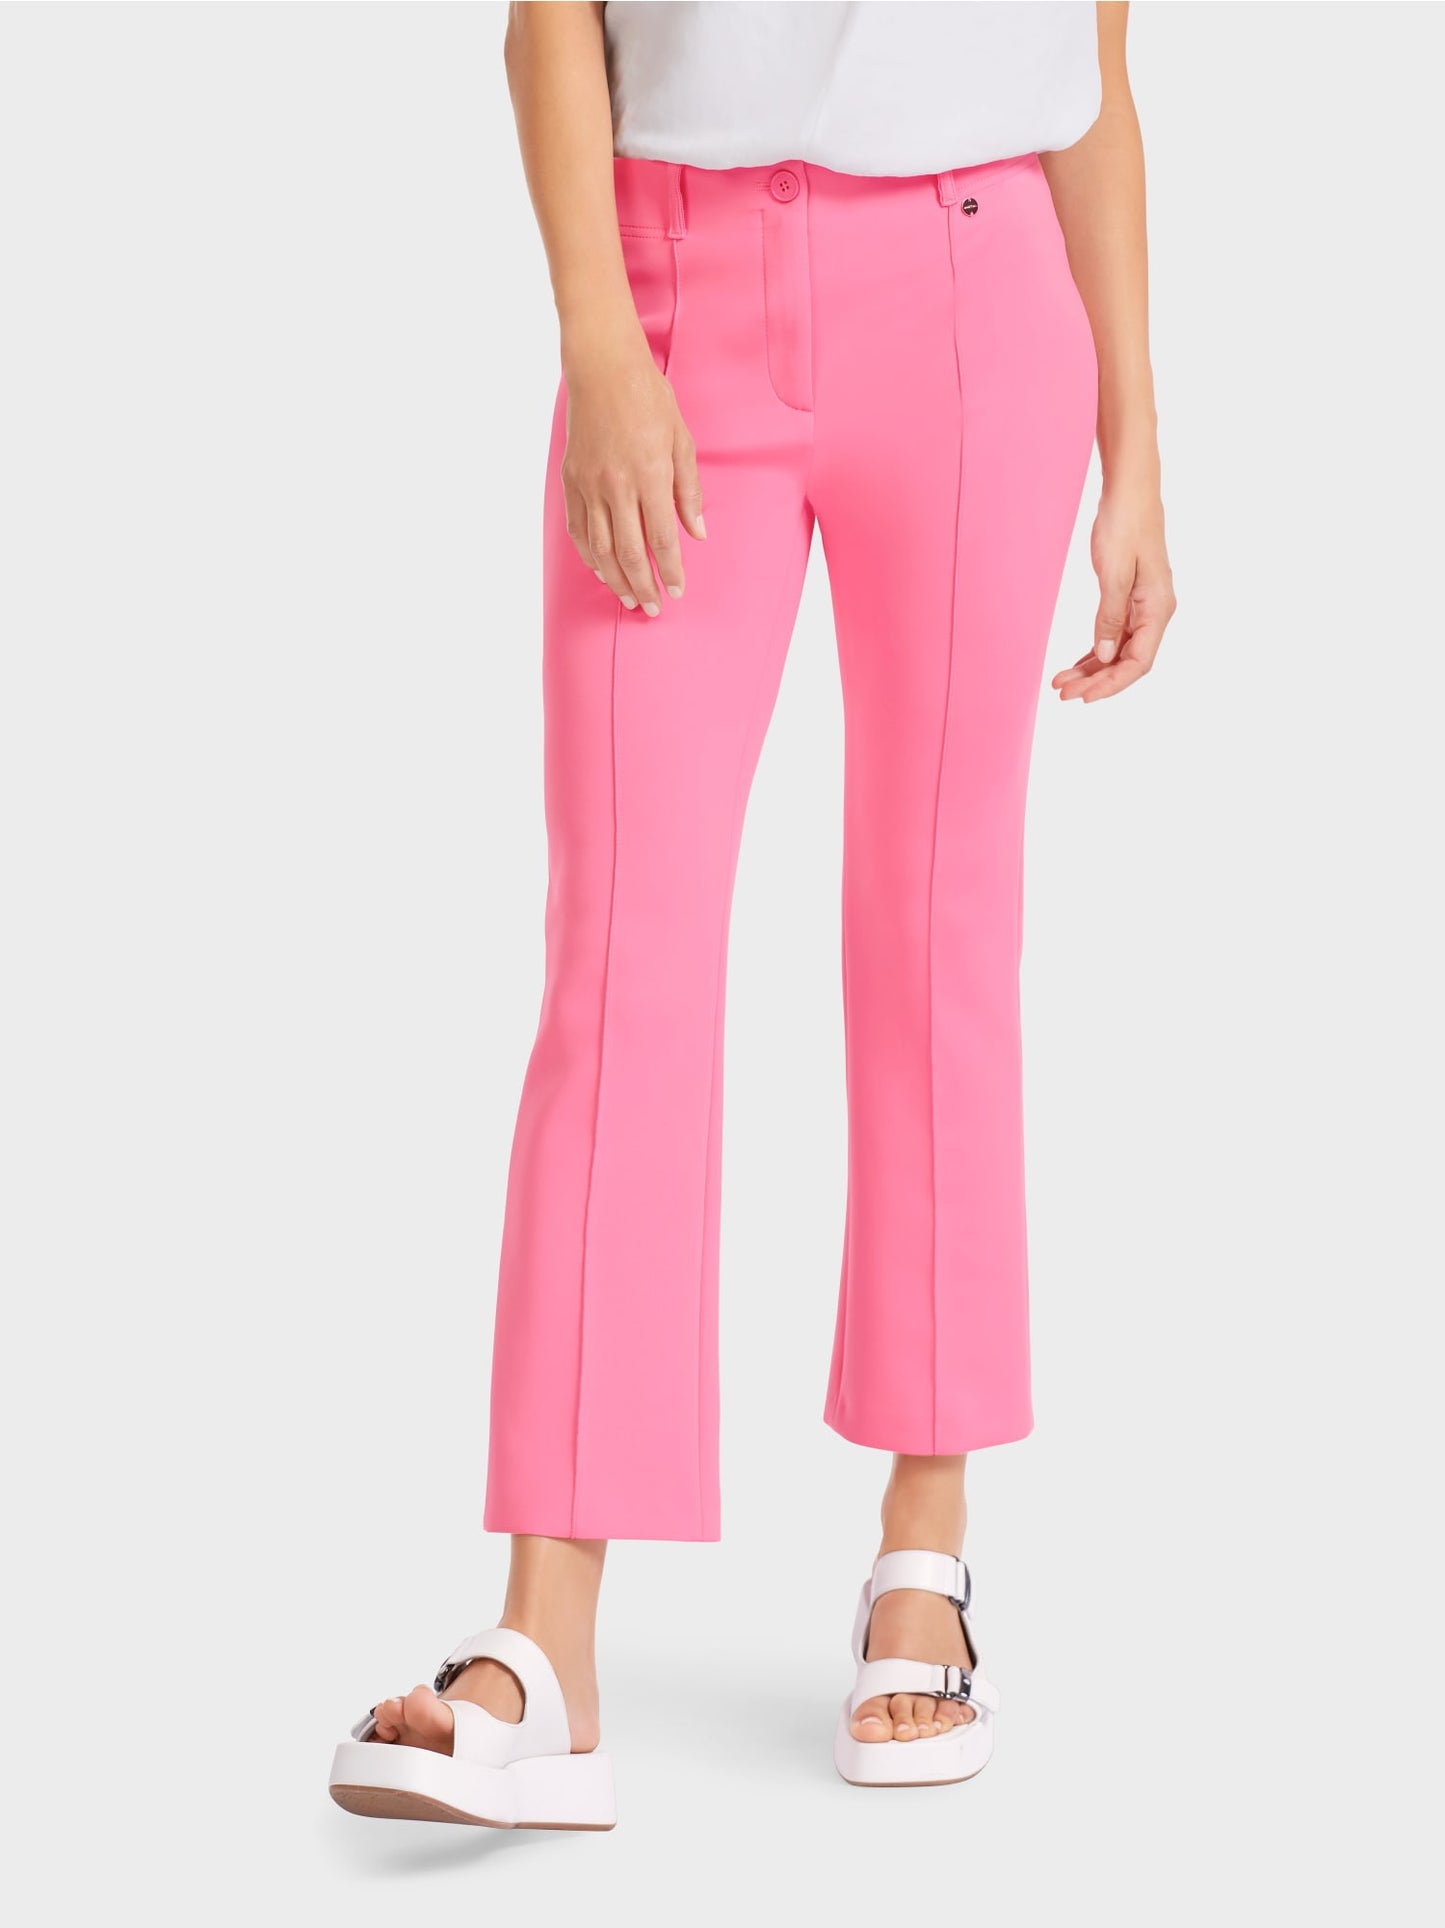 Classic Pants with Pressed Creases - SALE